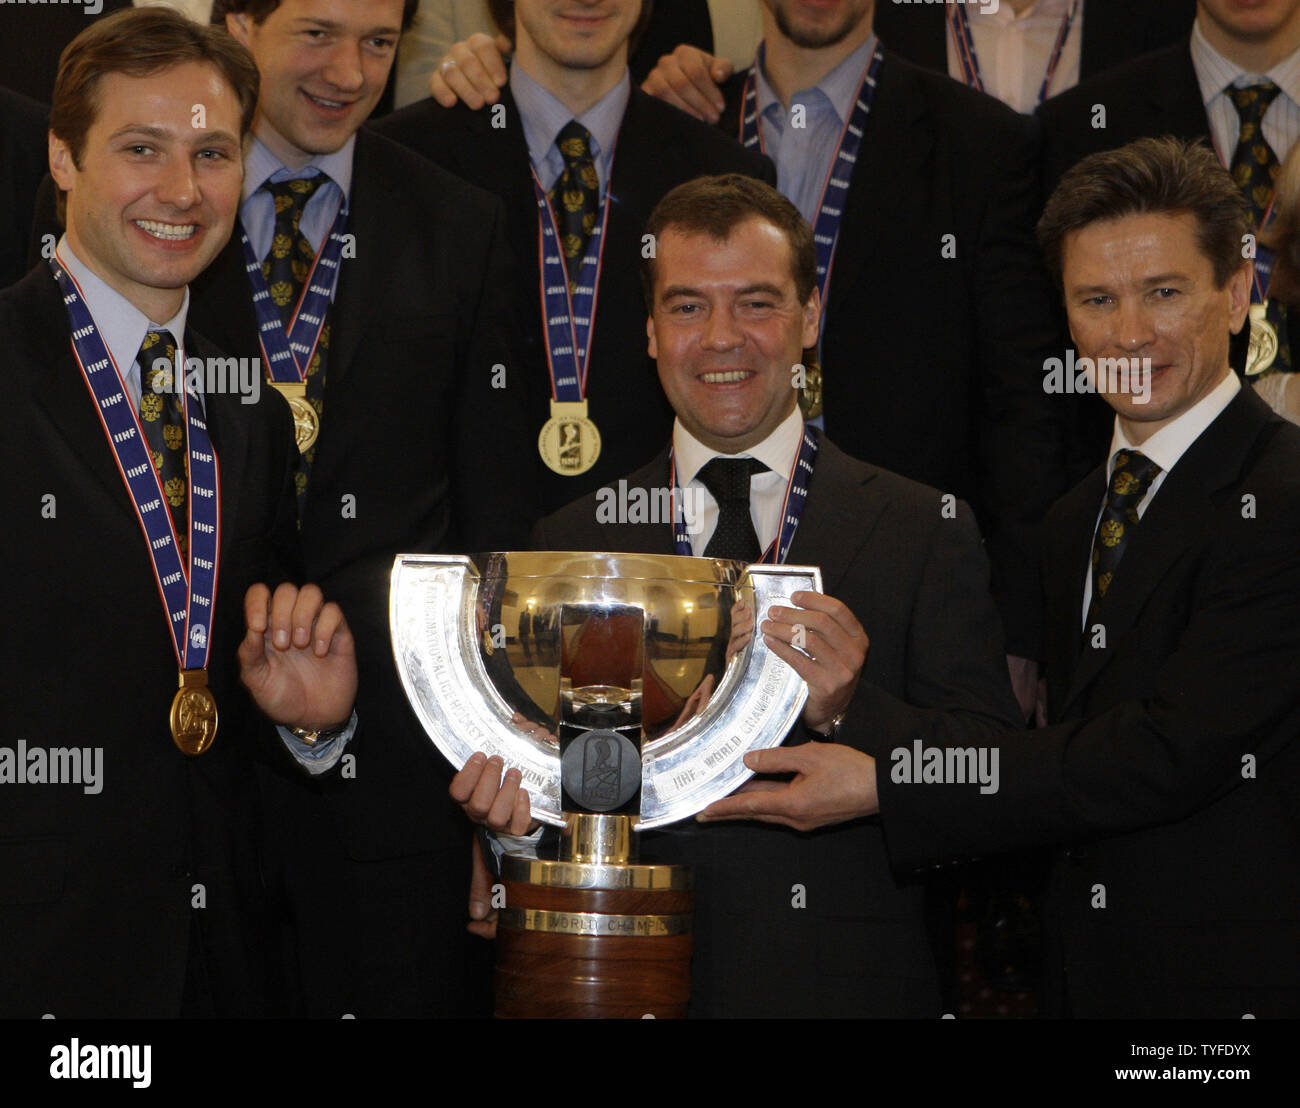 Russian President Dmitry Medvedev (C) holds the World Hockey Championships trophy with captain Alexei Morozov (L) and coach Vyacheslav Bykov (R) during his meeting with the national ice hockey team in the Kremlin in Moscow on May 12, 2009. In the final match on Sunday Russia beat Canada 2-1 and won the gold-medal of the ice hockey world championships. (UPI Photo/Anatoli Zhdanov) Stock Photo